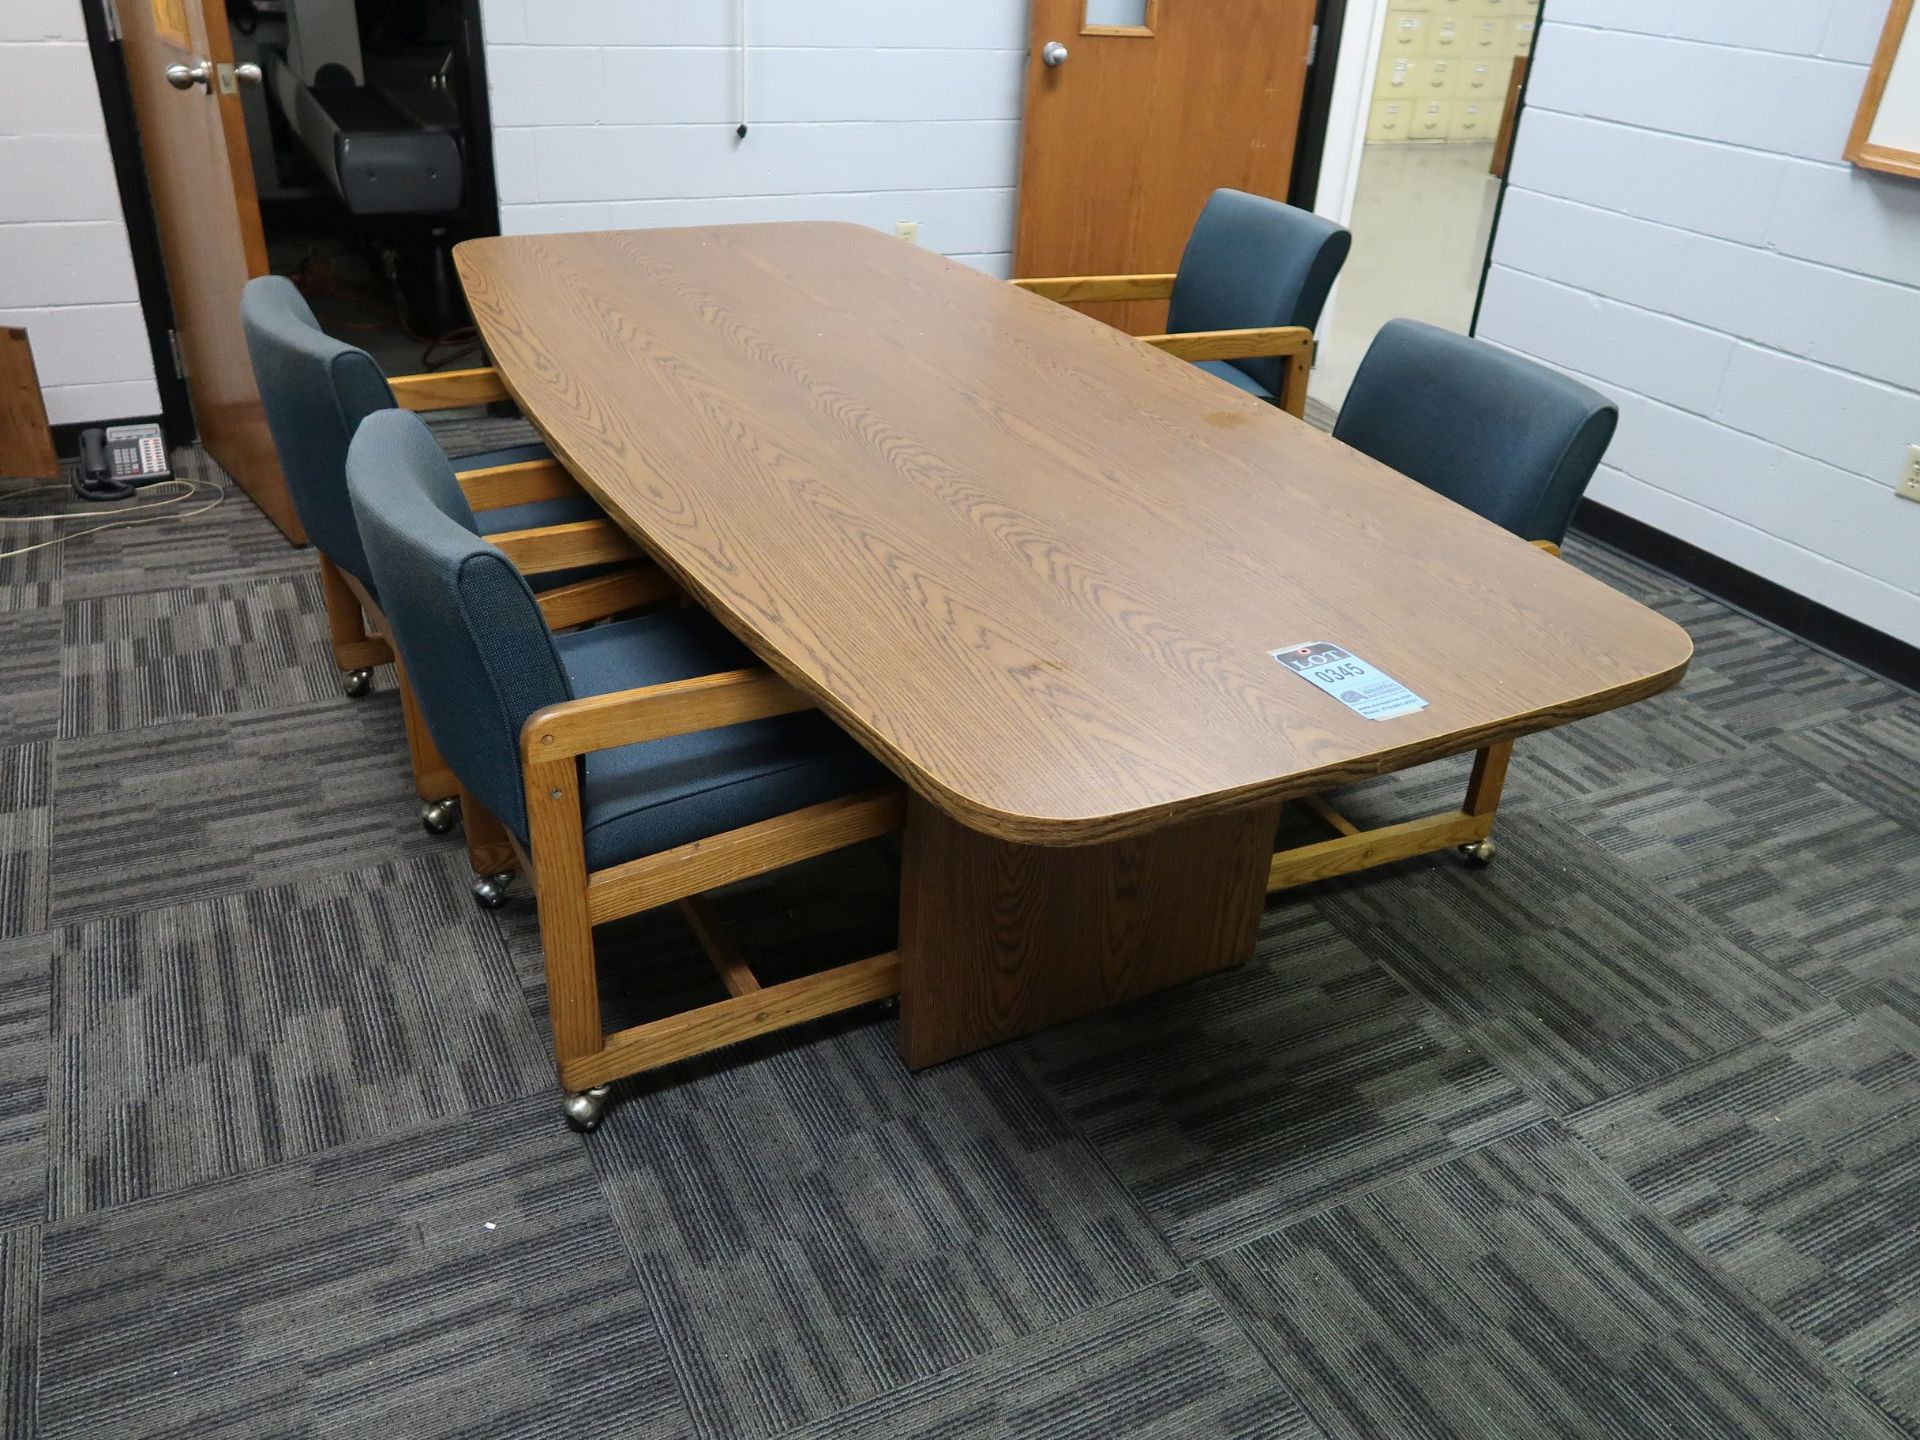 44" X 96" X 29" HIGH WOOD LAMINATED CONFERENCE TABLE WITH WOOD FRAME CLOTH CHAIRS